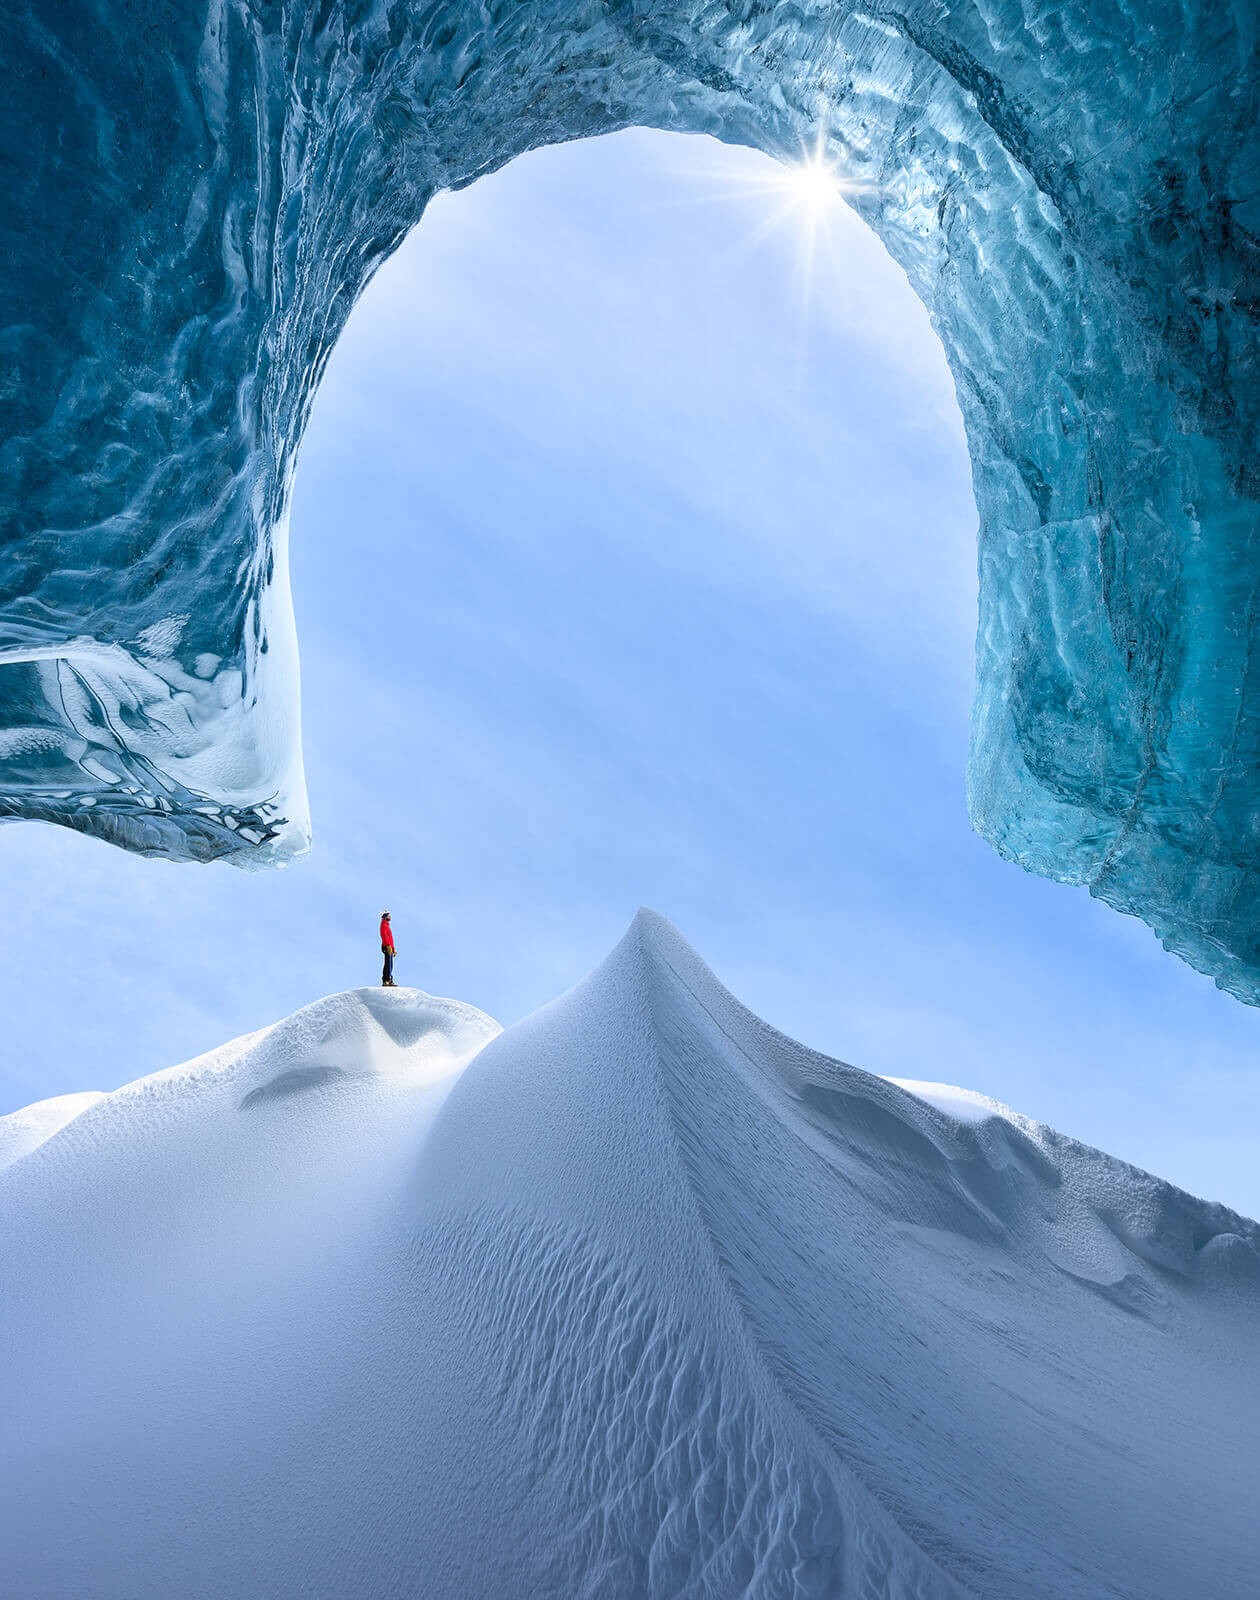 photographed from inside an ice cave in iceland 62d 2